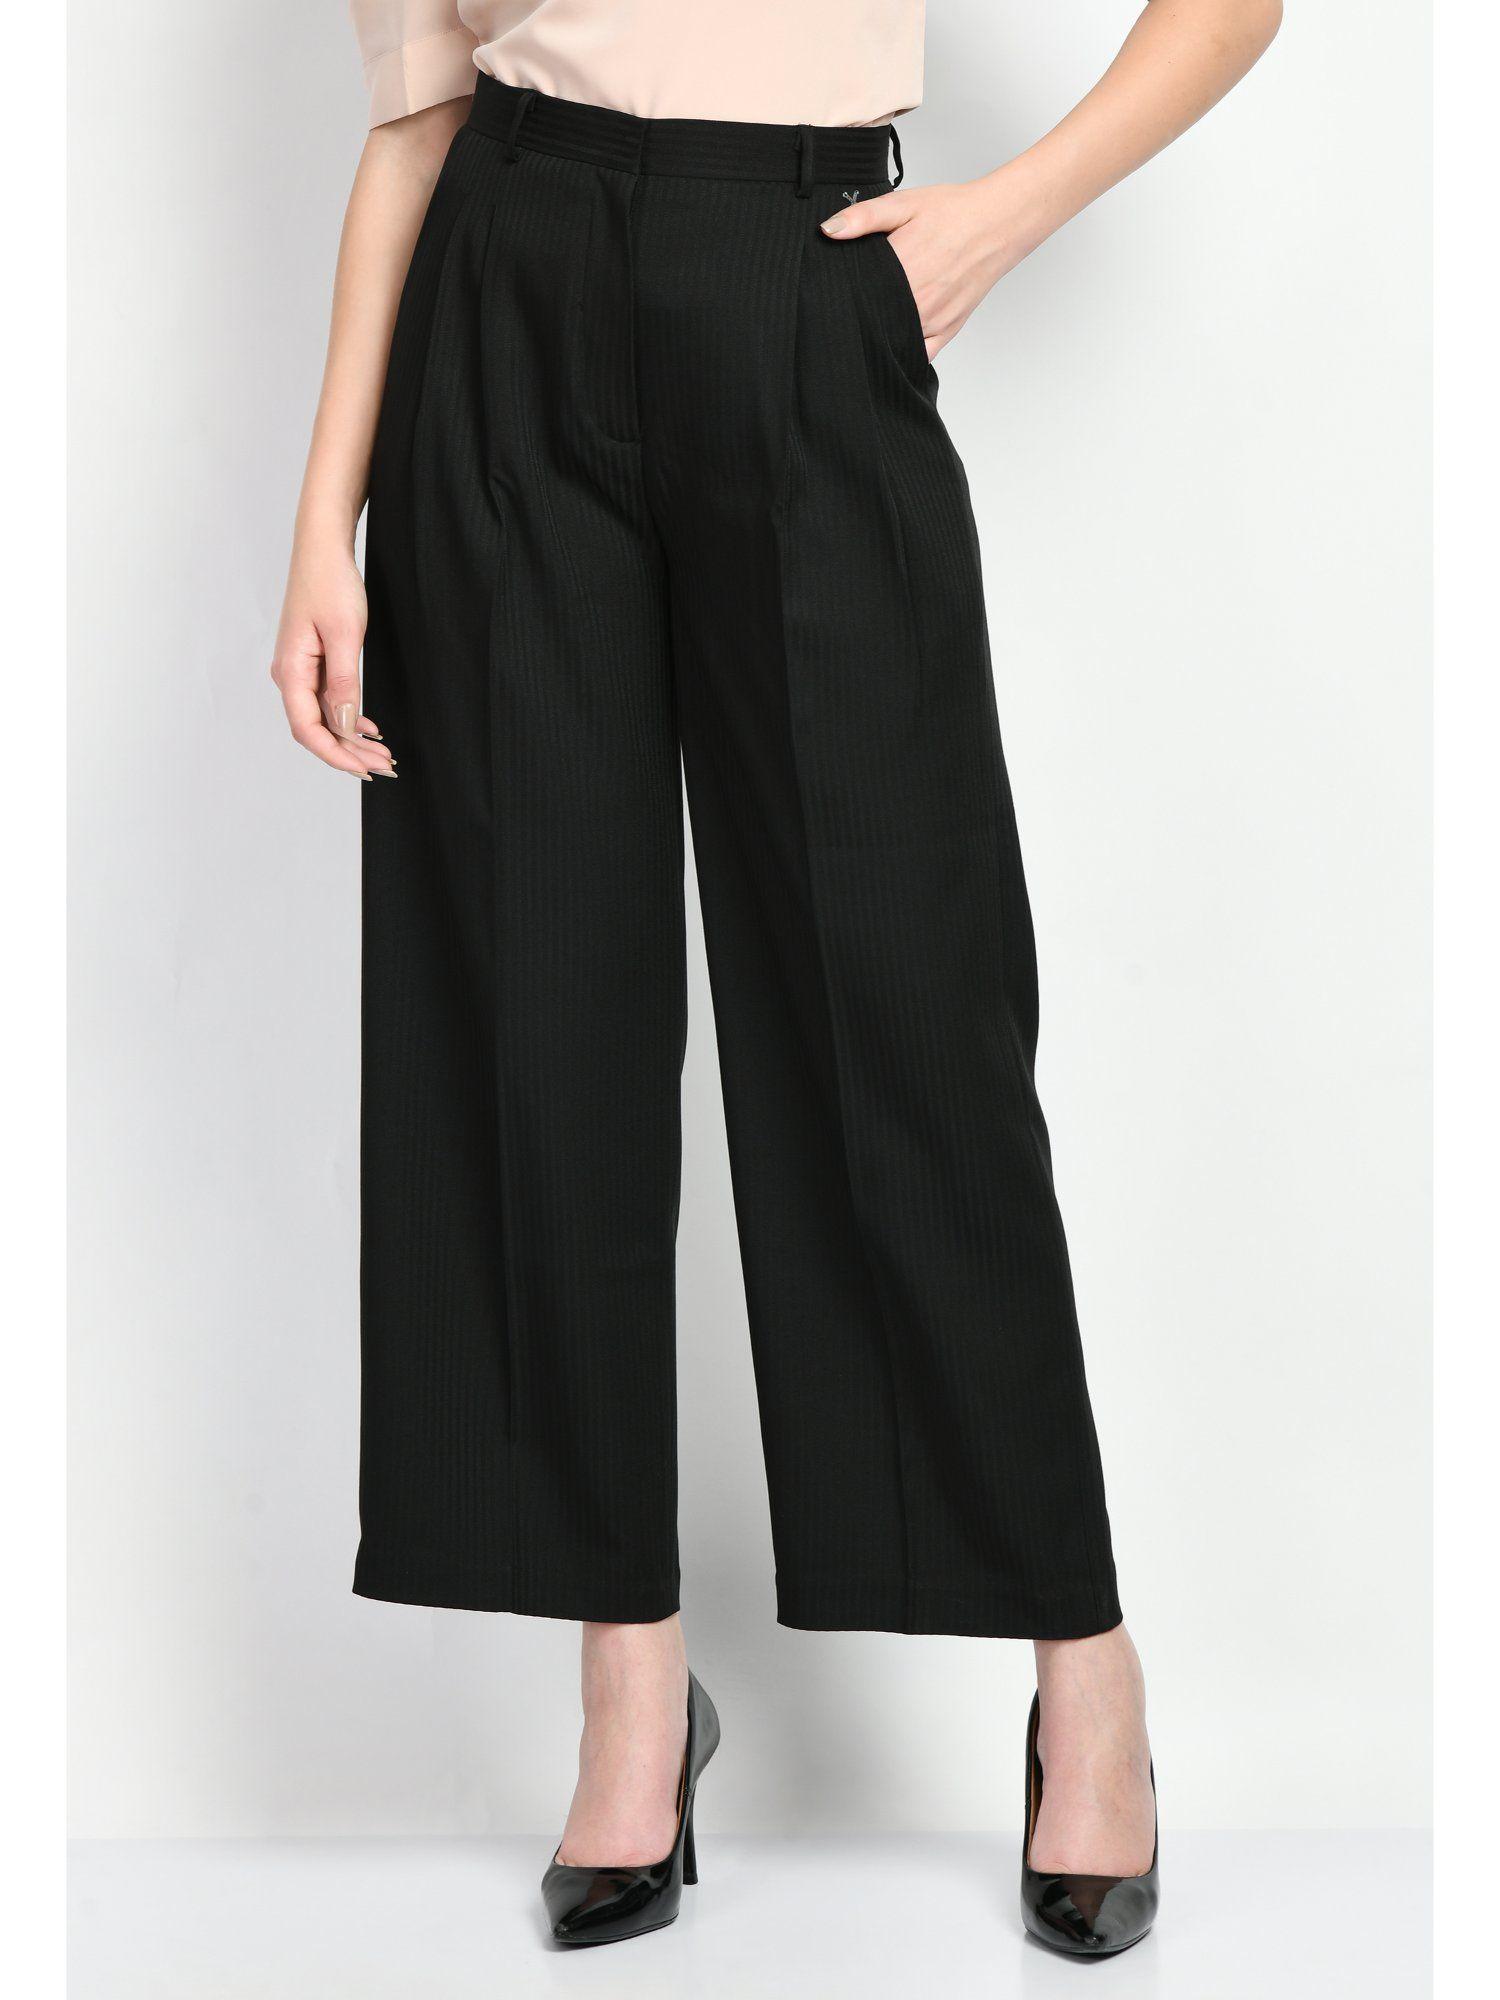 prowess striped wide leg trousers - black